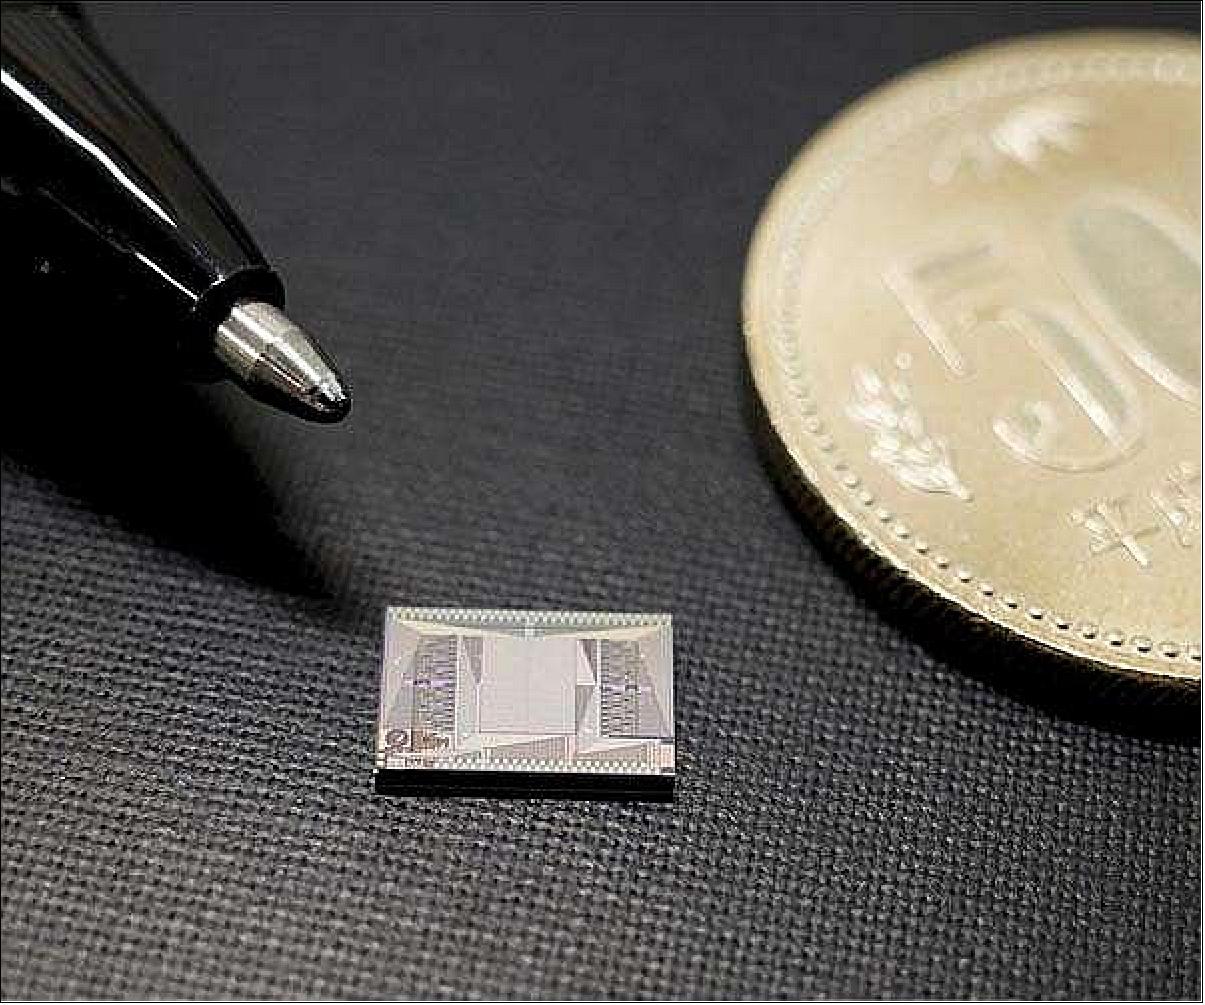 Figure 38: A small-sized silicon photonics chip that can be used for non-mechanical beam steering and scanning (image credit: Yokohama National University)